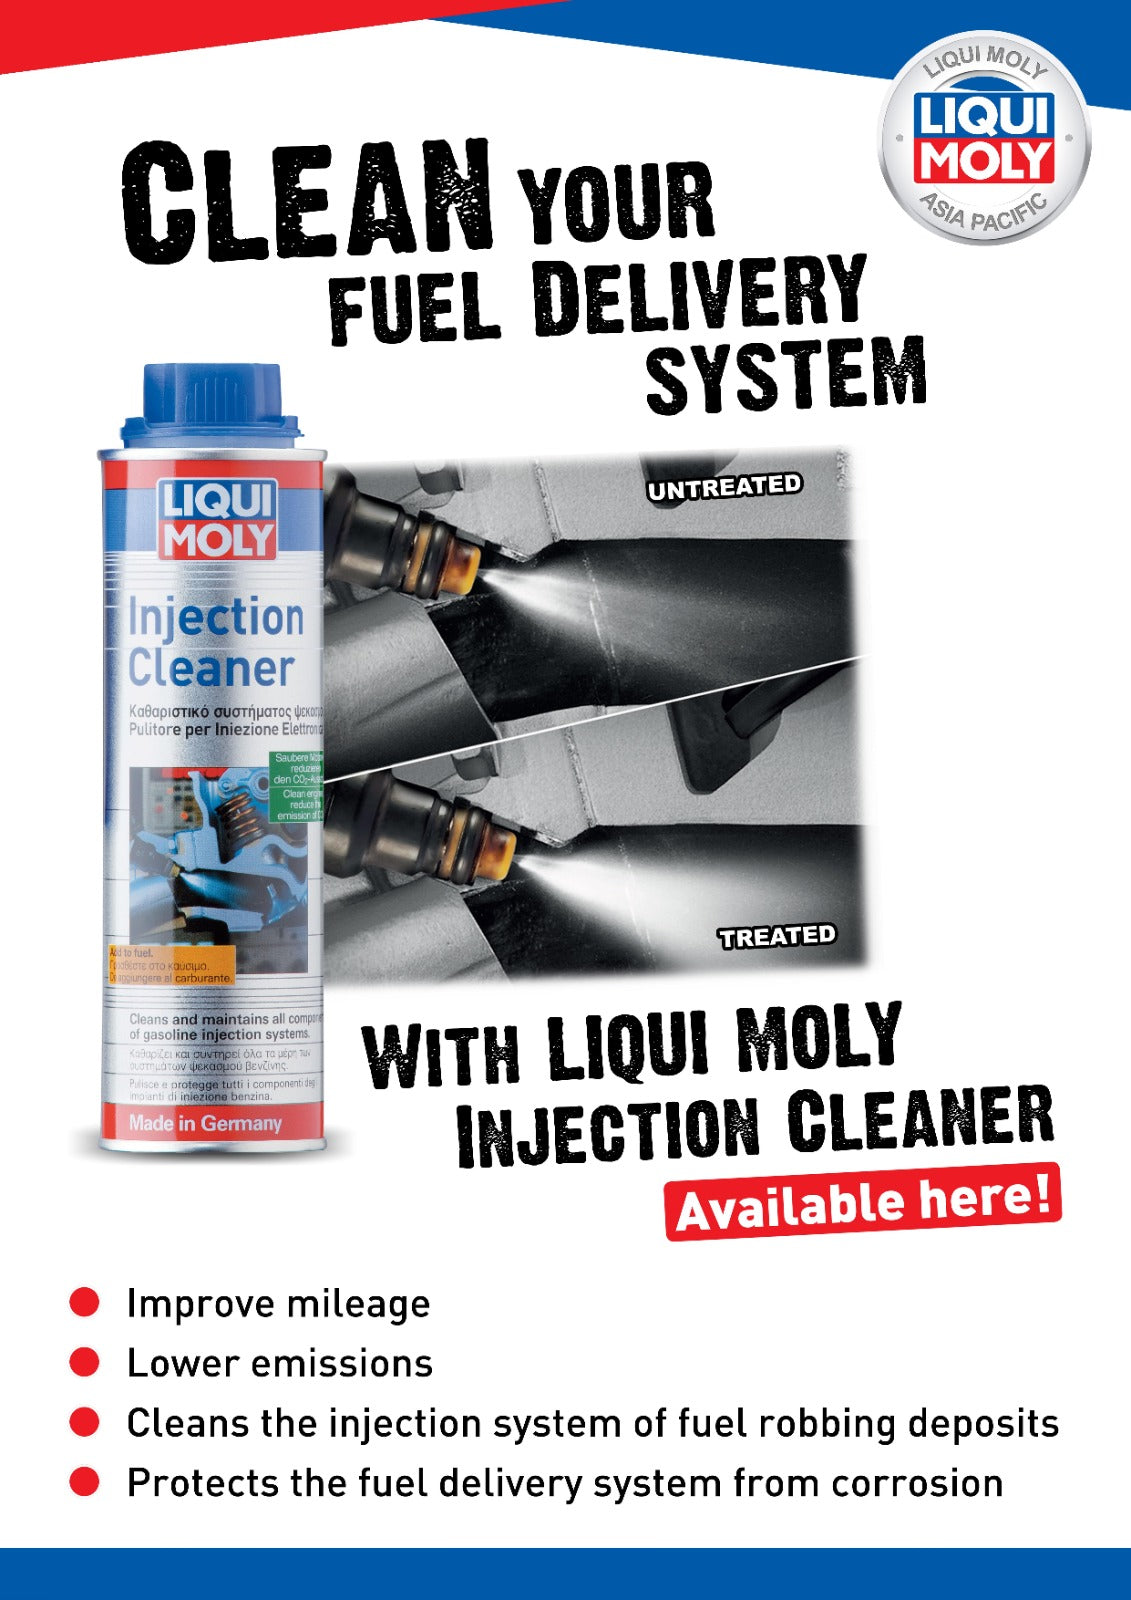 Liqui Moly Injection Cleaner (300ml)